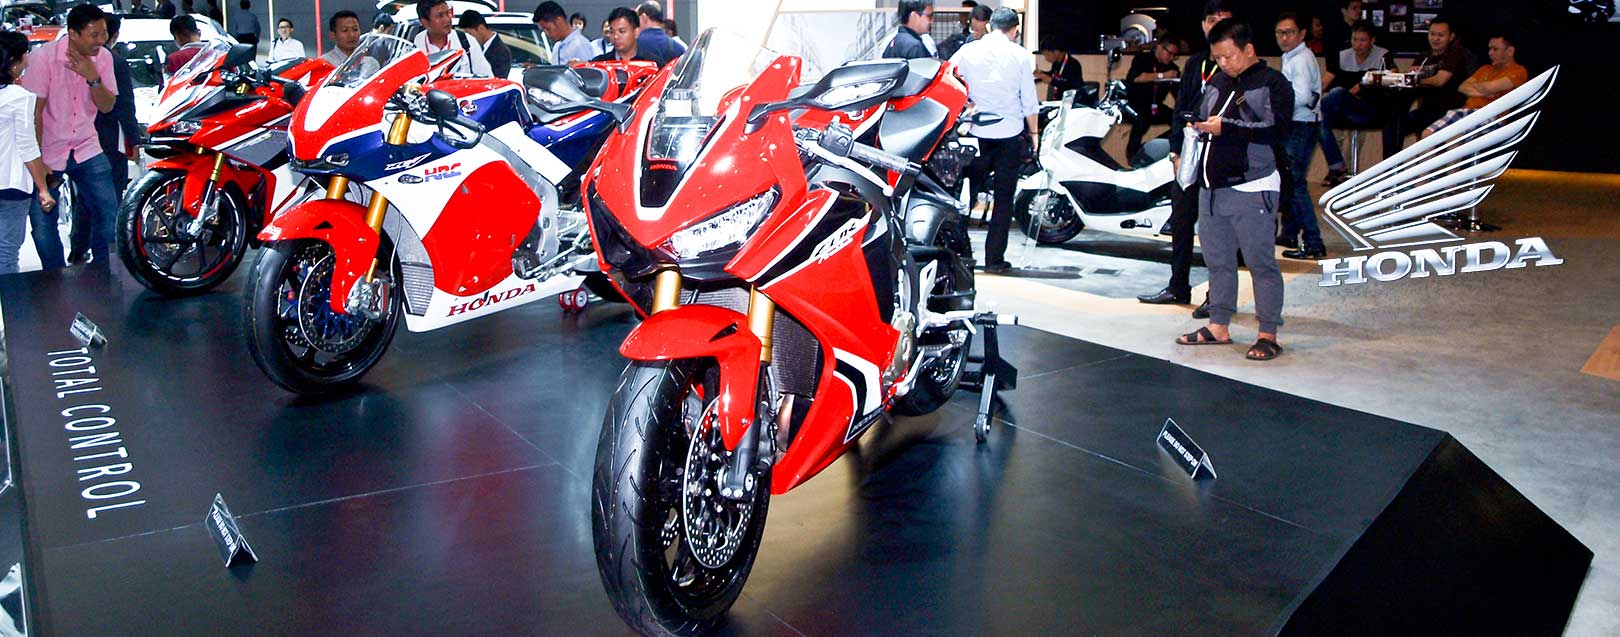 Honda 2Wheelers overall sales up 20% at 544,508 units in July